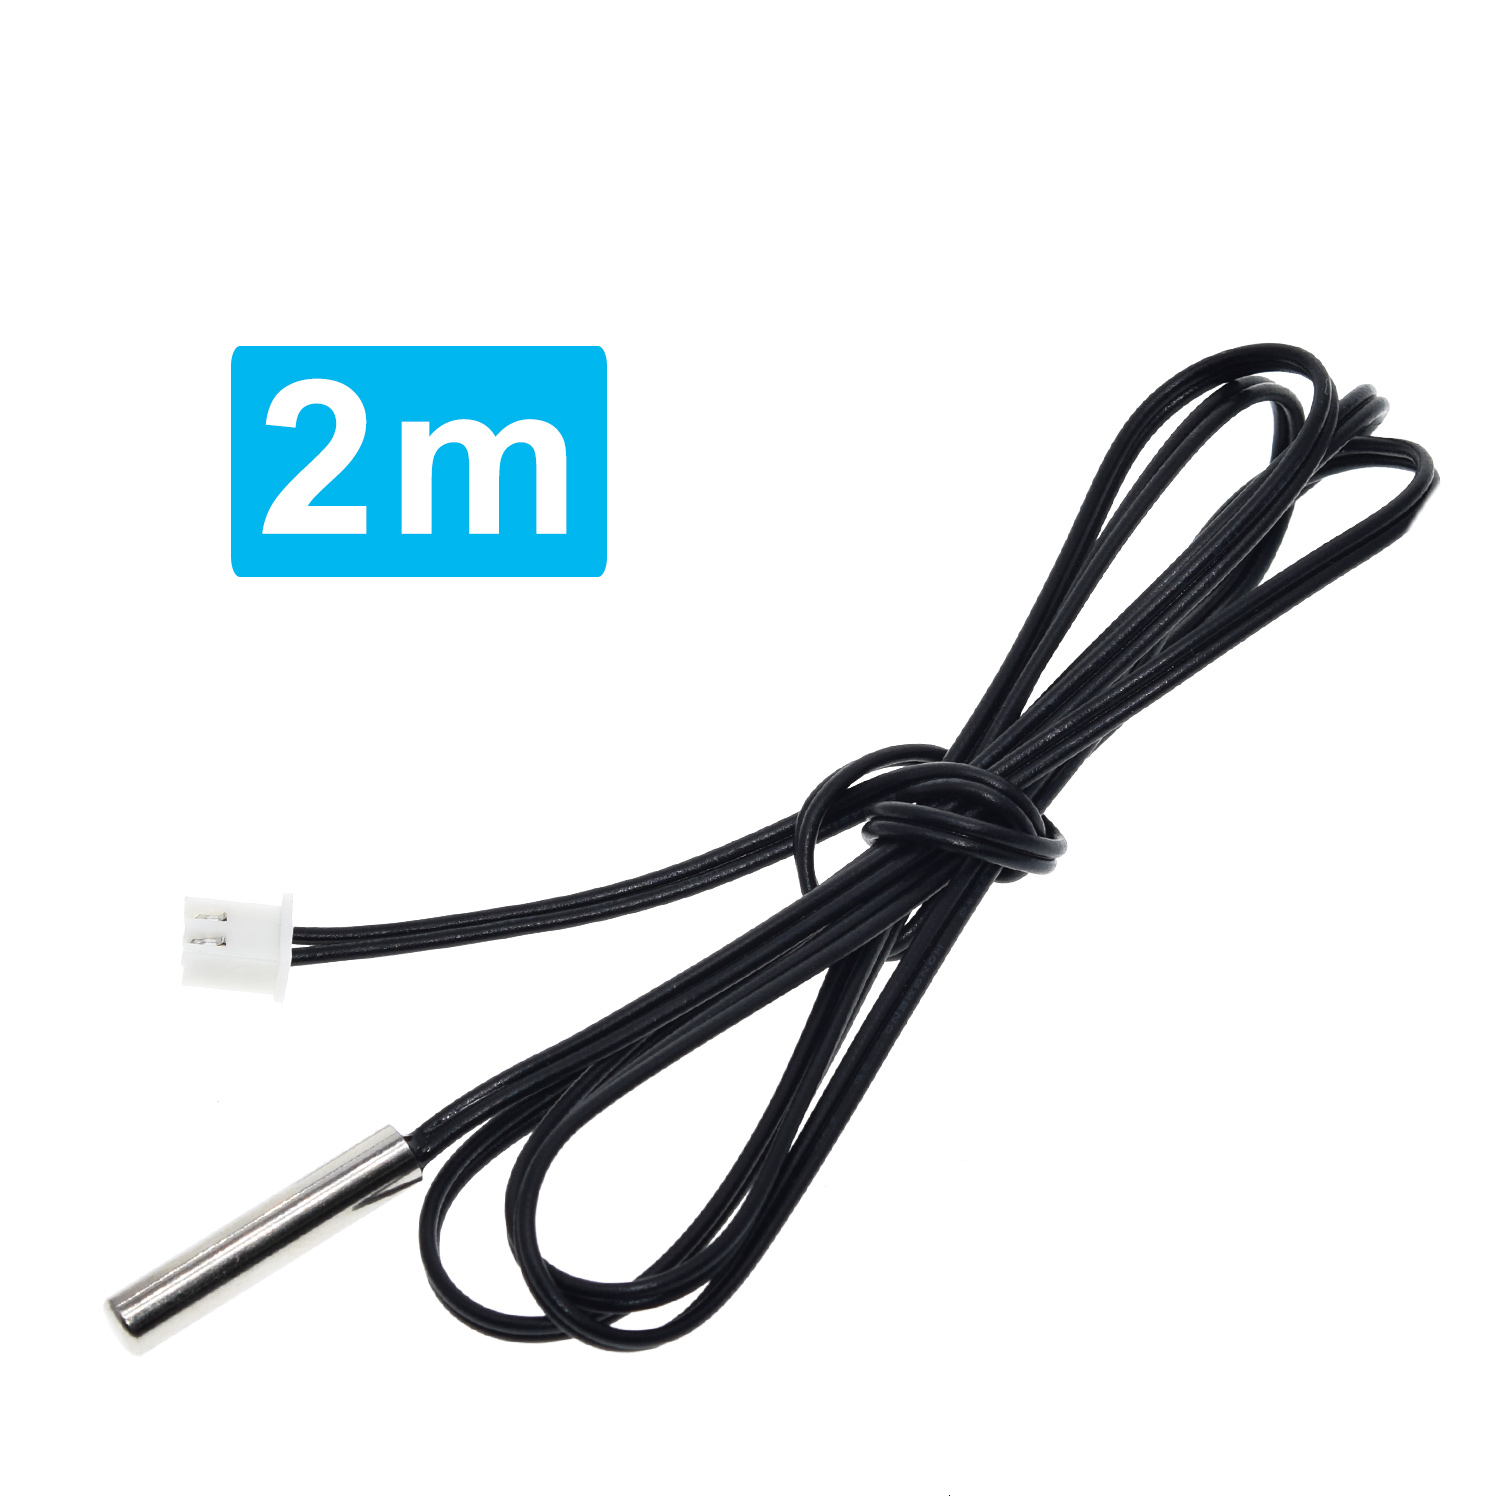 dImg3_2M Cable94.jpg